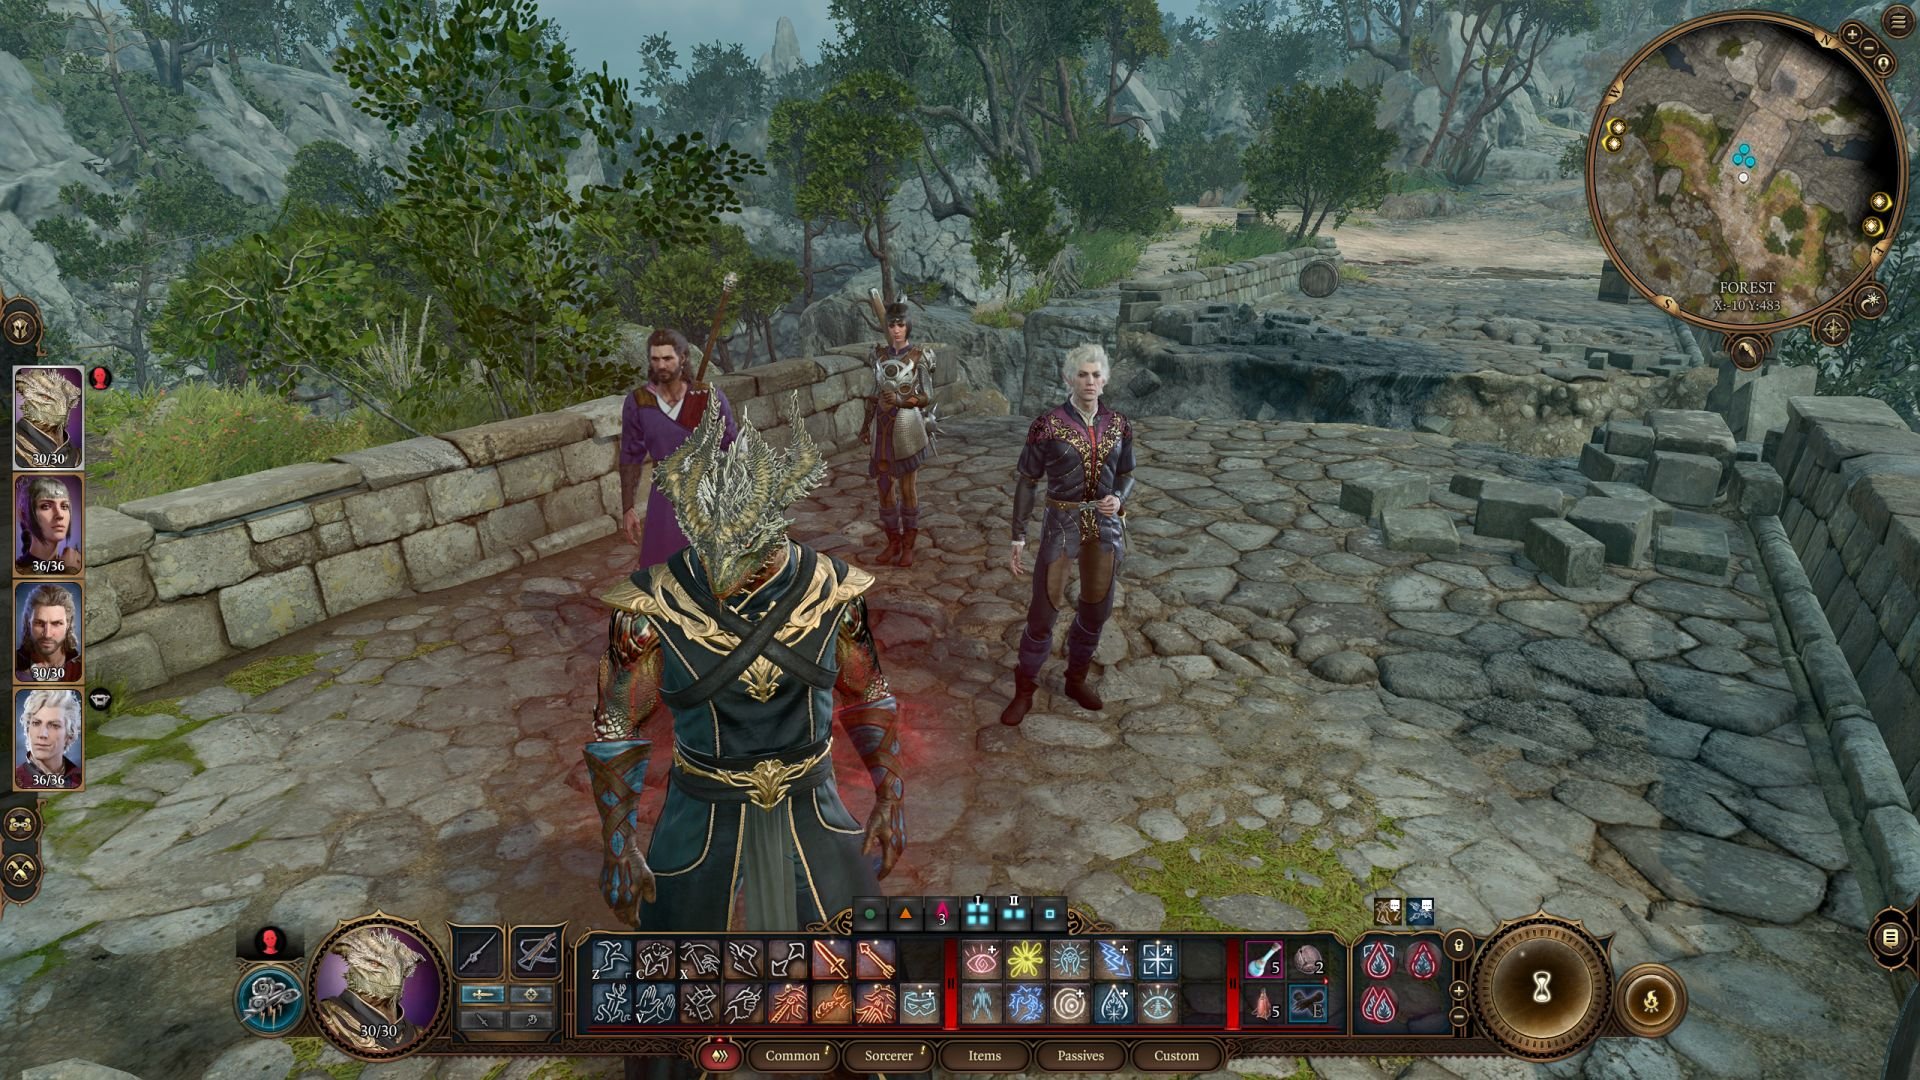 Review: There's Plenty To Enjoy in BALDUR'S GATE 3, But it Still